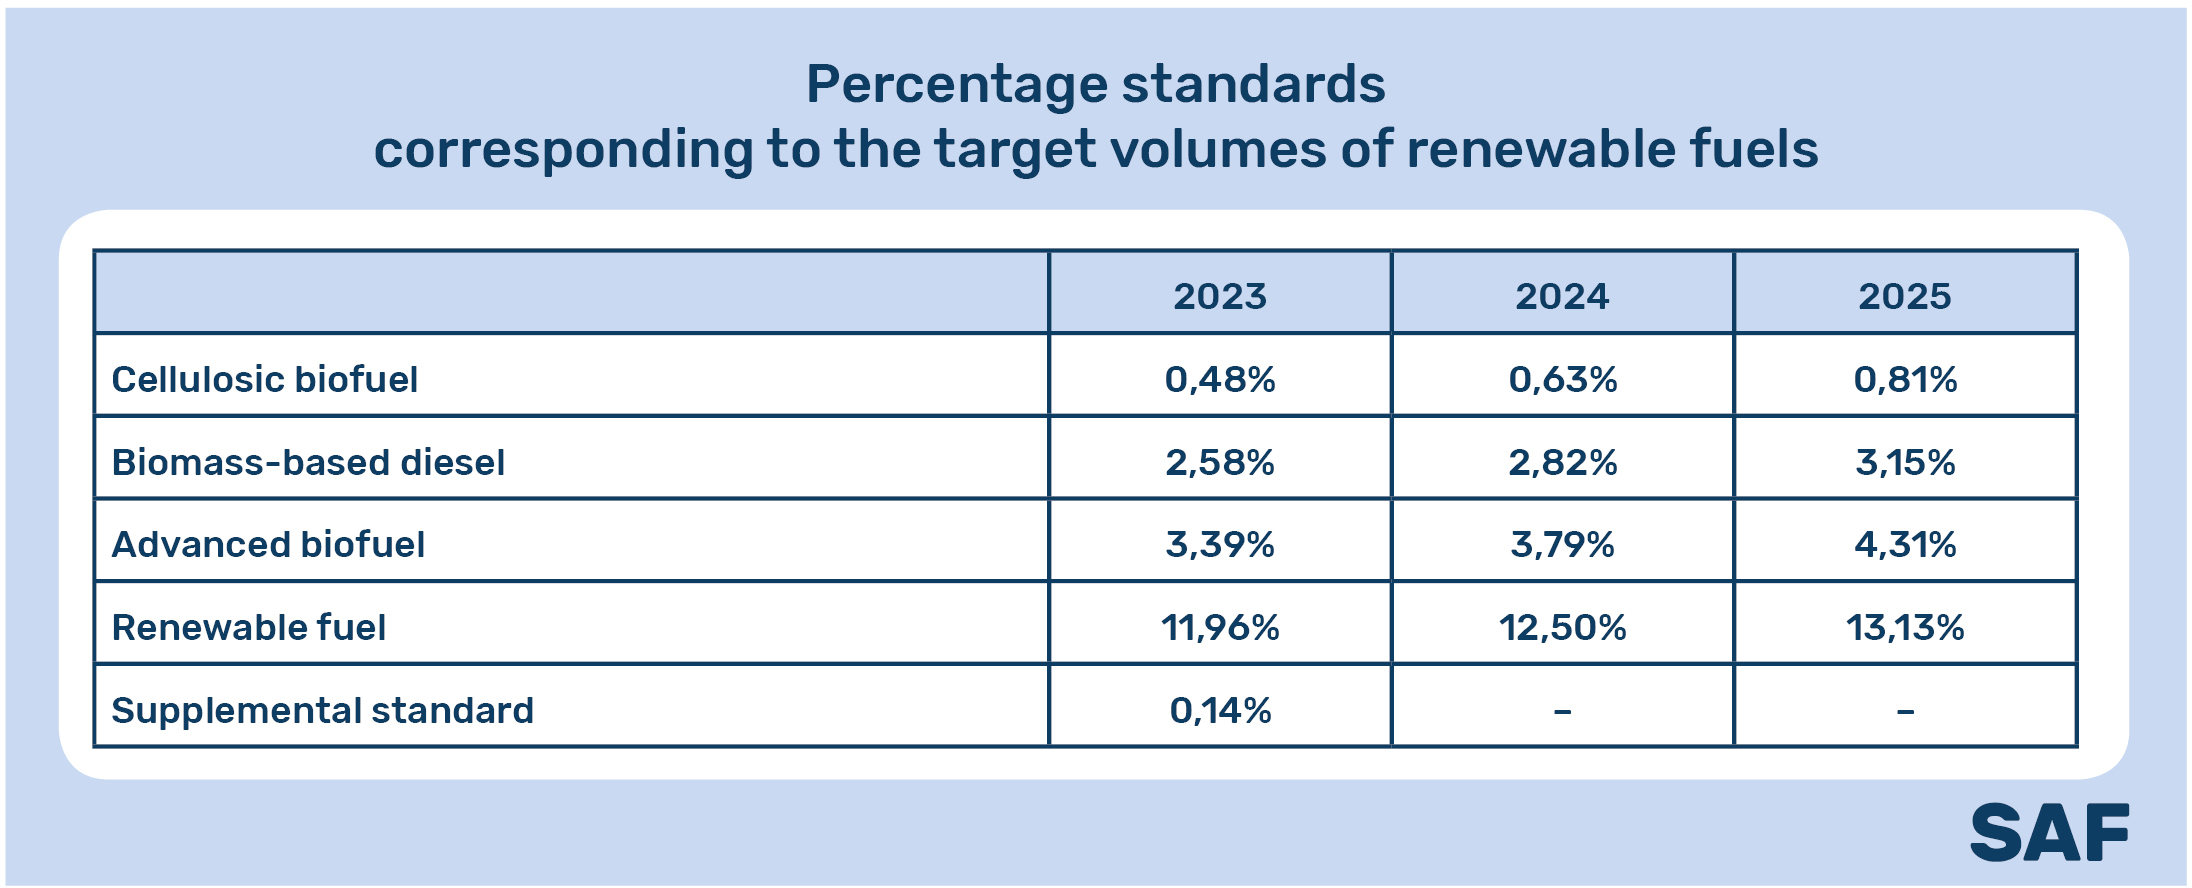 Percentage standards corresponding to the target volumes of renewable fuels 